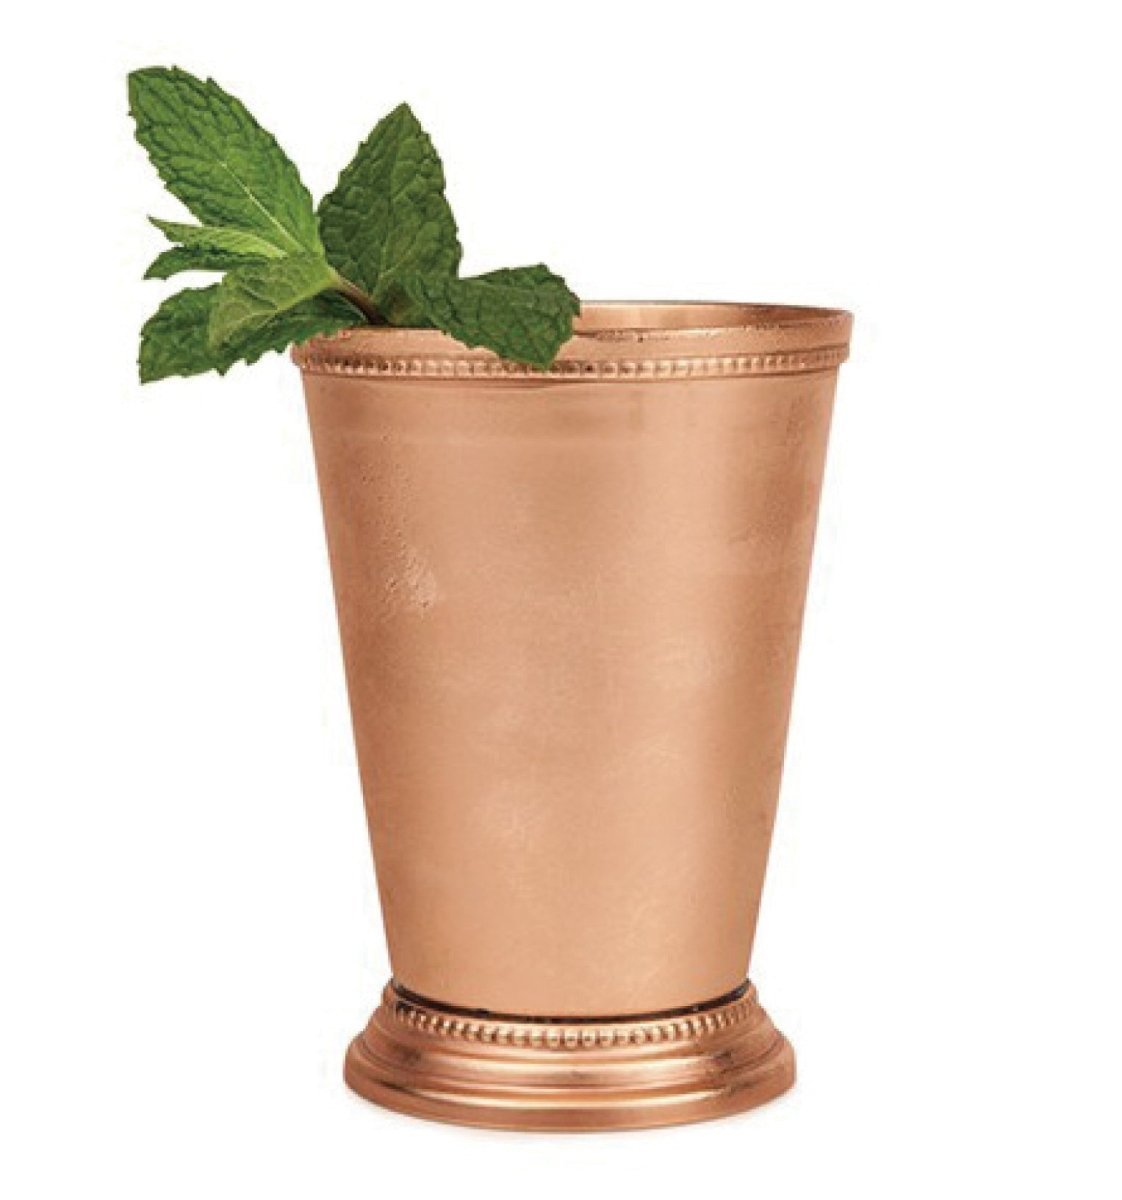 Copper Plated Beaded Mint Julep Cup 360ml 12oz - Easiley - CUPS1313-BEAD